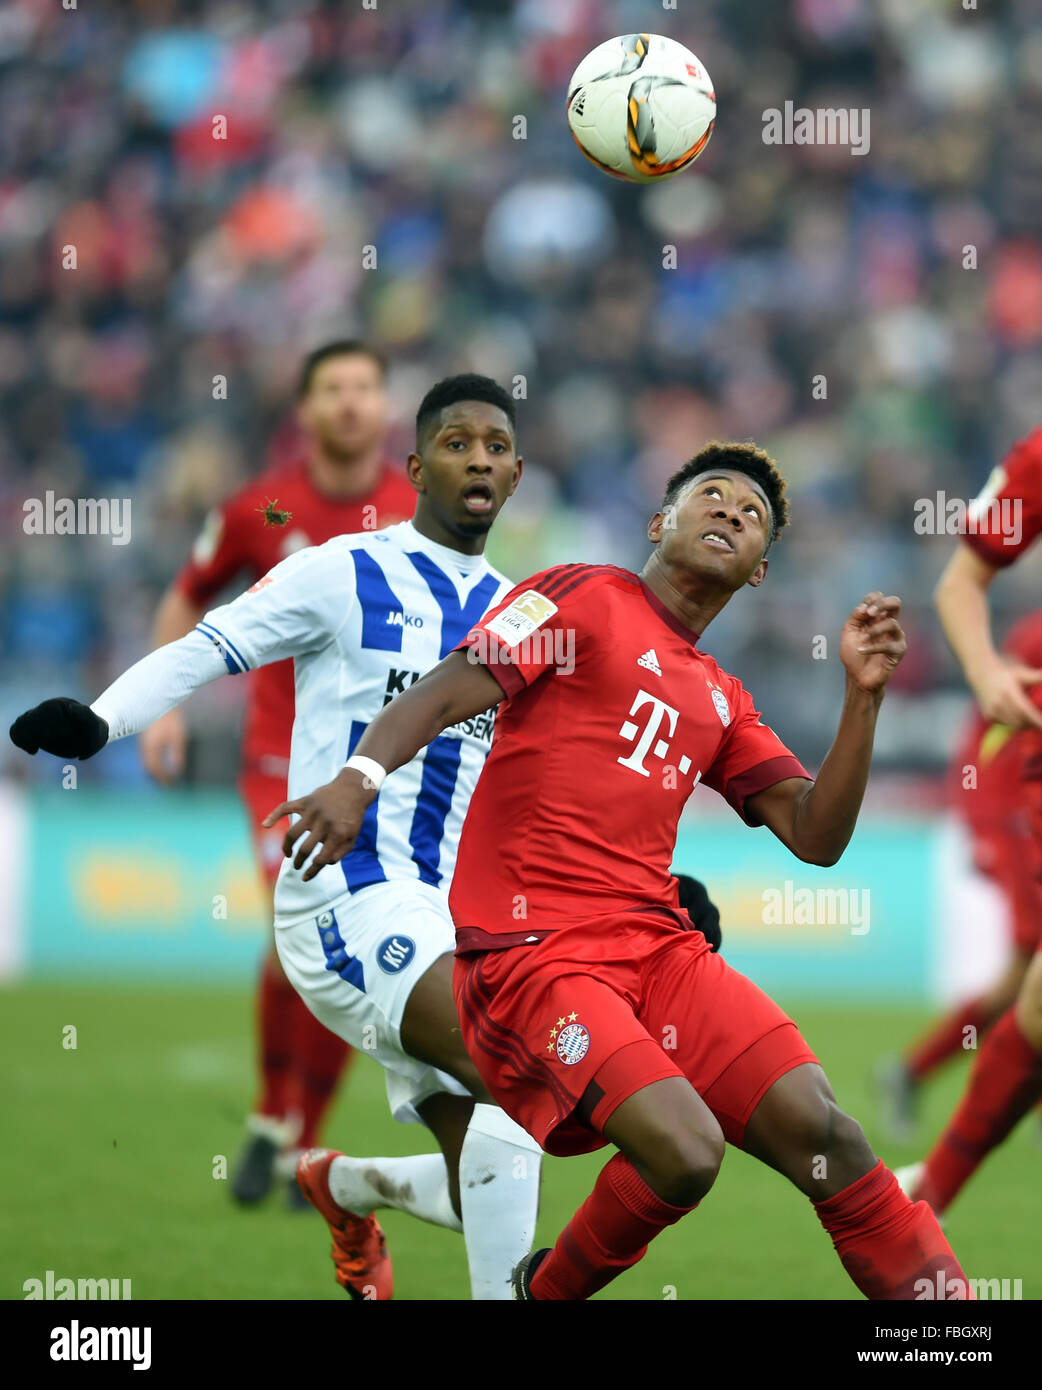 Karlsruhe, Germany. 16th Jan, 2016. Karlsruhe's Boubacar Barry (L) and Munich's David Alaba vie for the ball during the test match between Karlsruher SC and FC Bayern Munich in Wildpark Stadium in Karlsruhe, Germany, 16 January 2016. Munich's goalkeeper Manuel Neuer stands to the right. Photo: ULI DECK/dpa/Alamy Live News Stock Photo